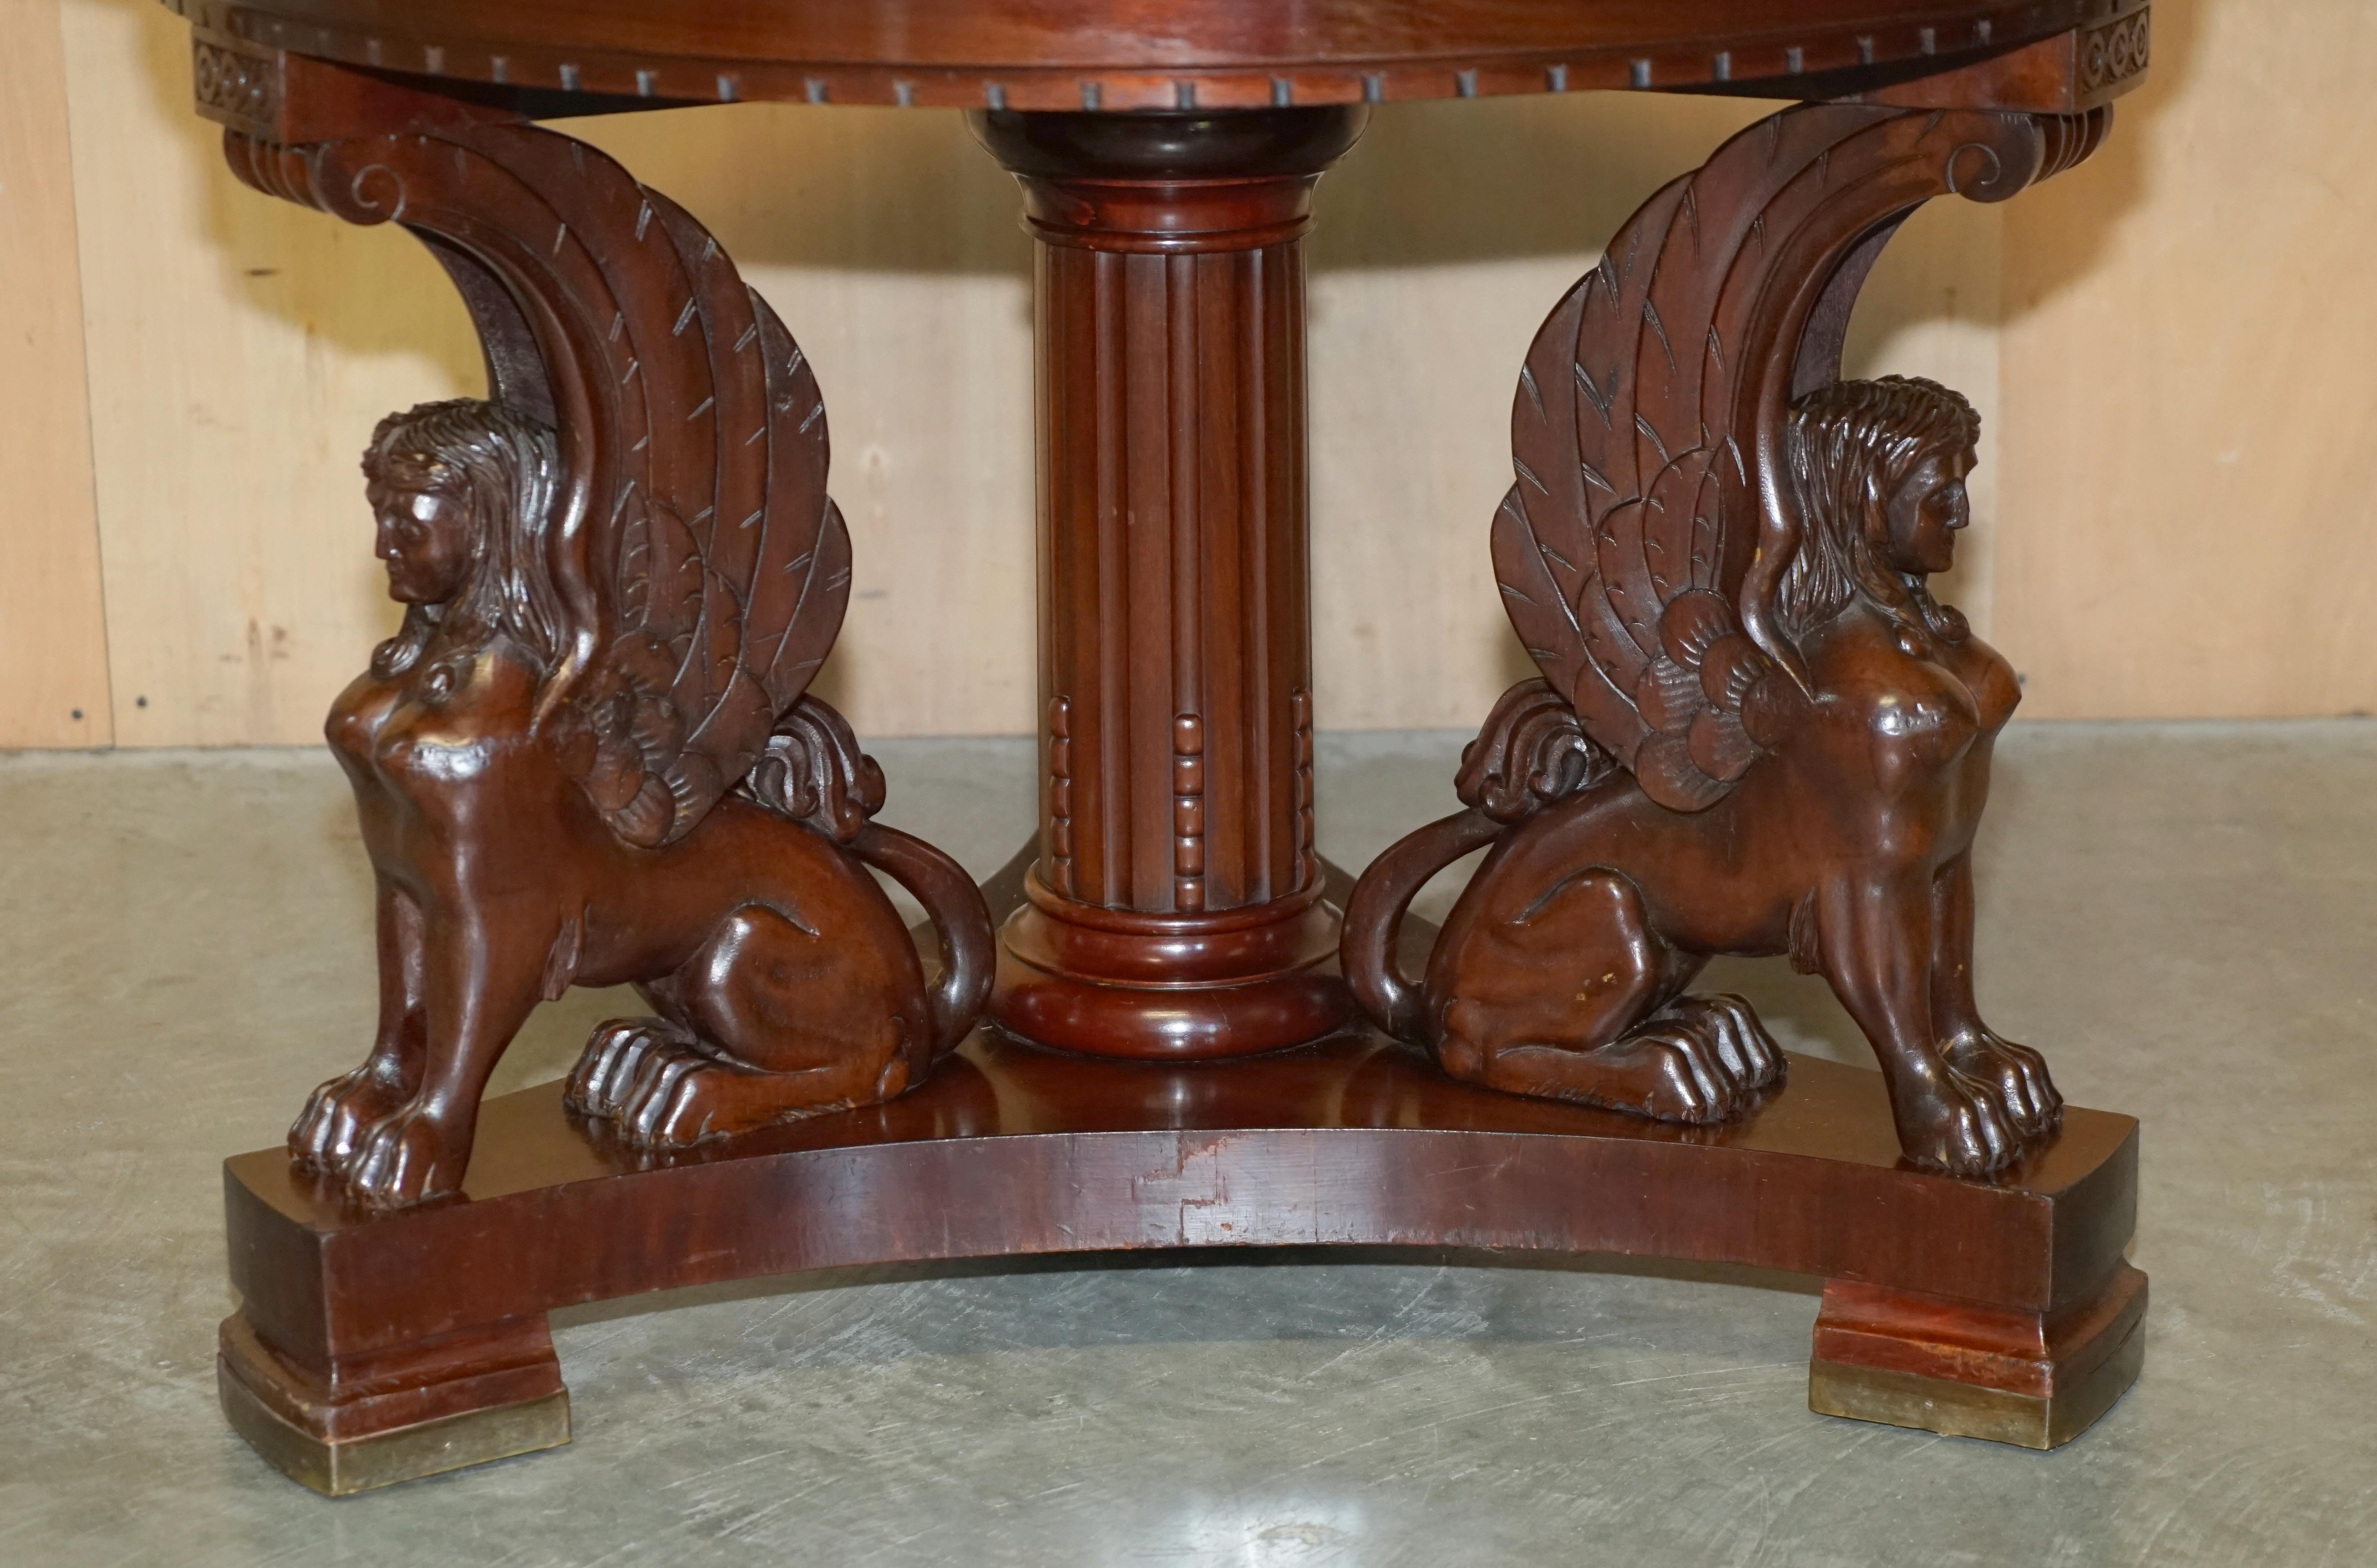 19th Century Fine Antique French Neoclassical Hardwood Centre Table with Sphinx Pillared Base For Sale